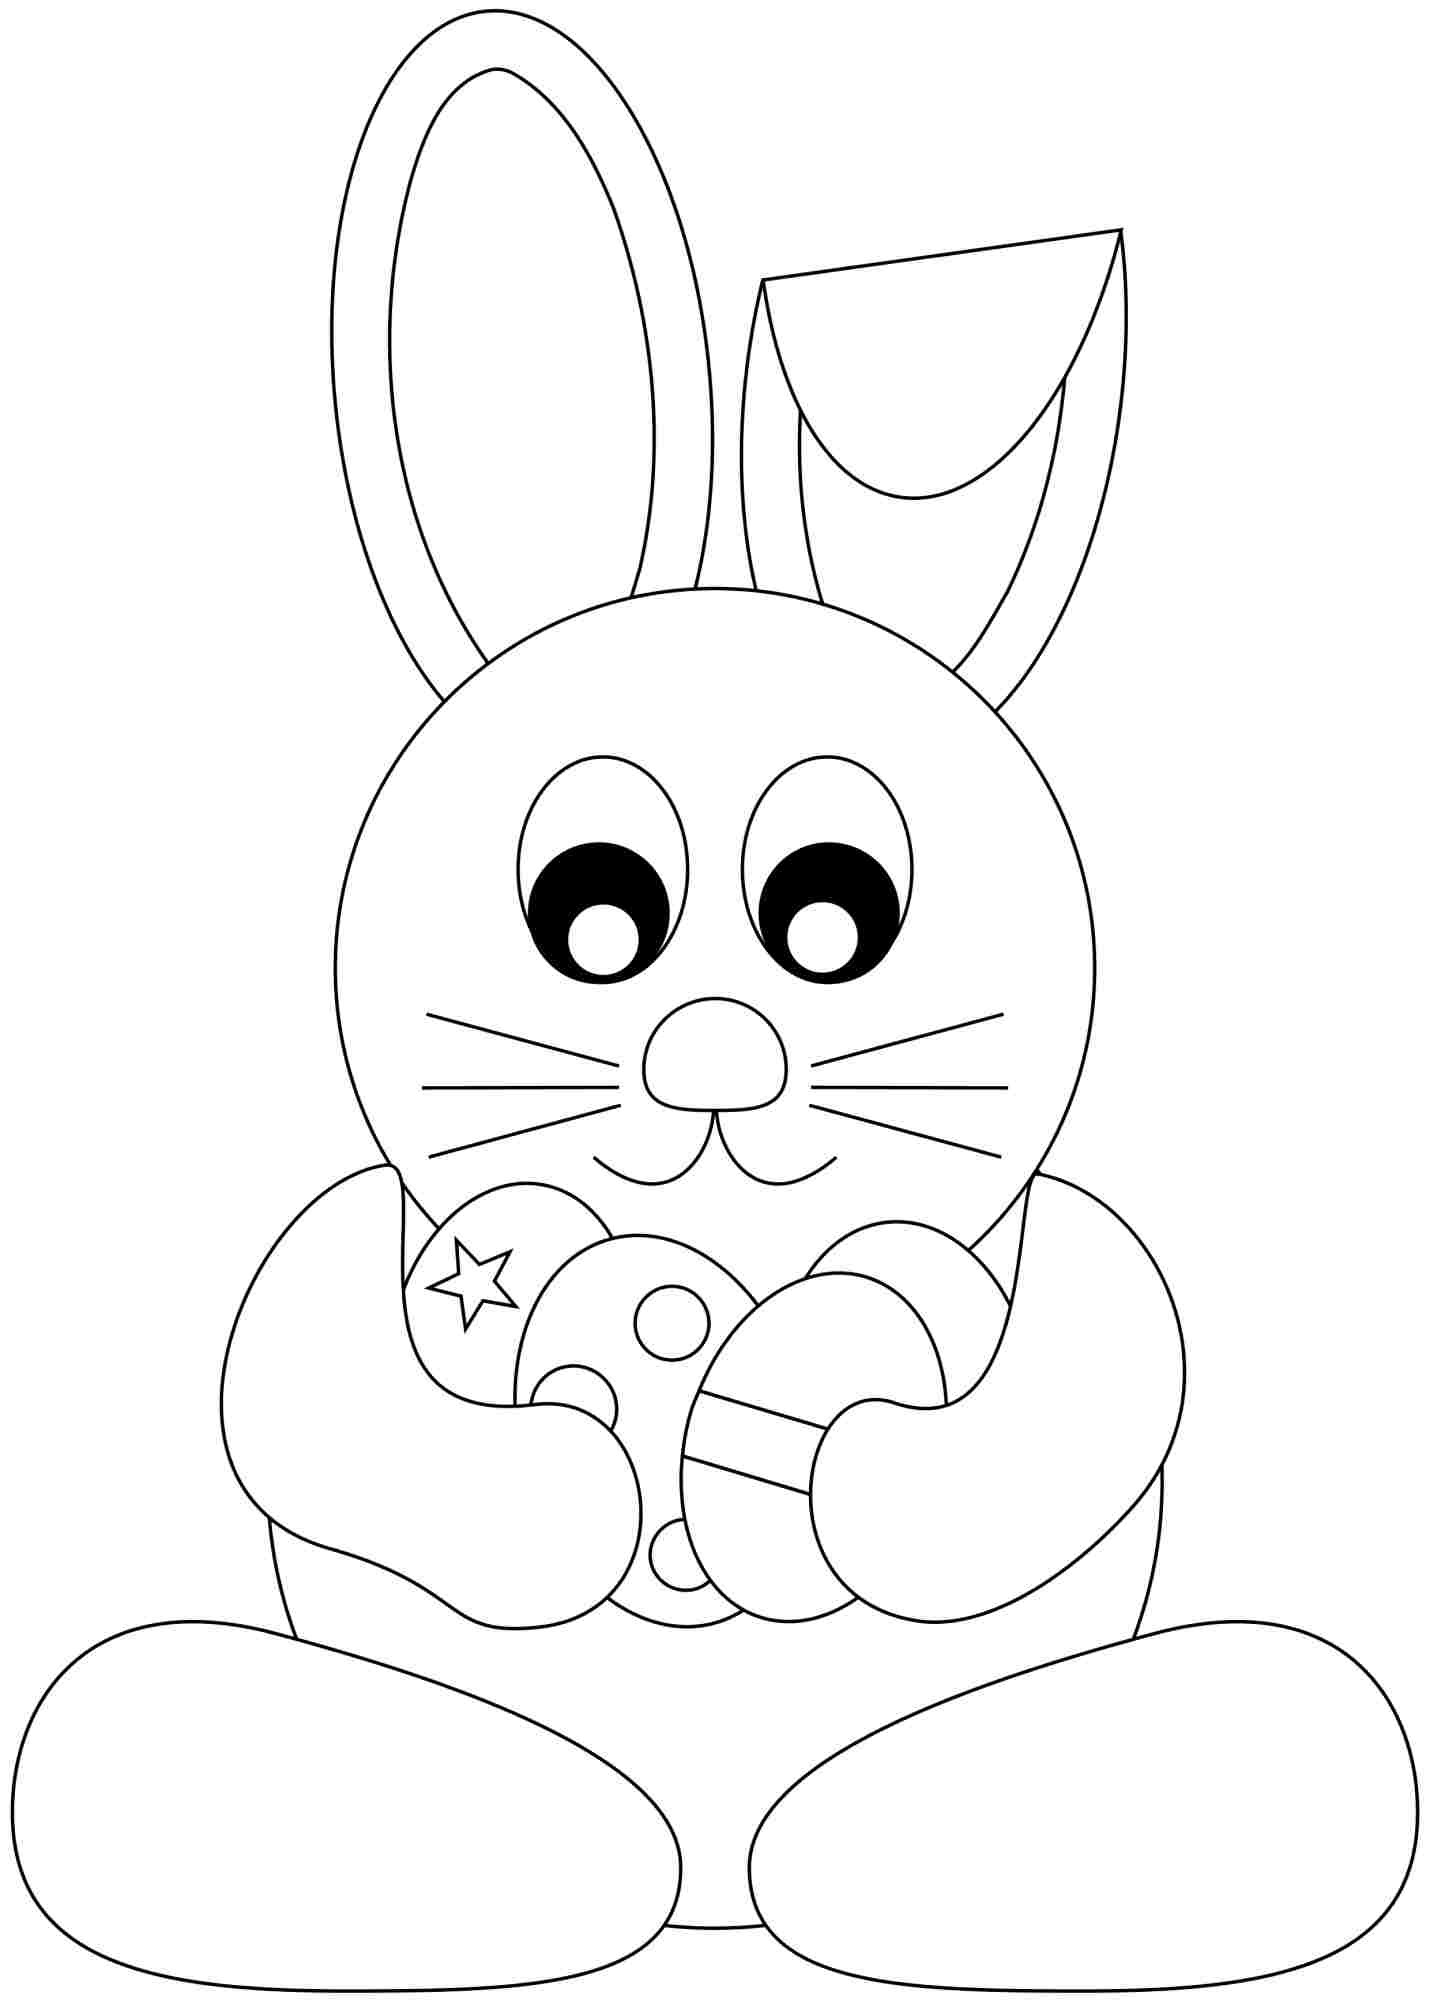 Easter Bunny Coloring Pages Free Printable
 44 Free Easter Bunny Coloring Pages To Print Easter Bunny